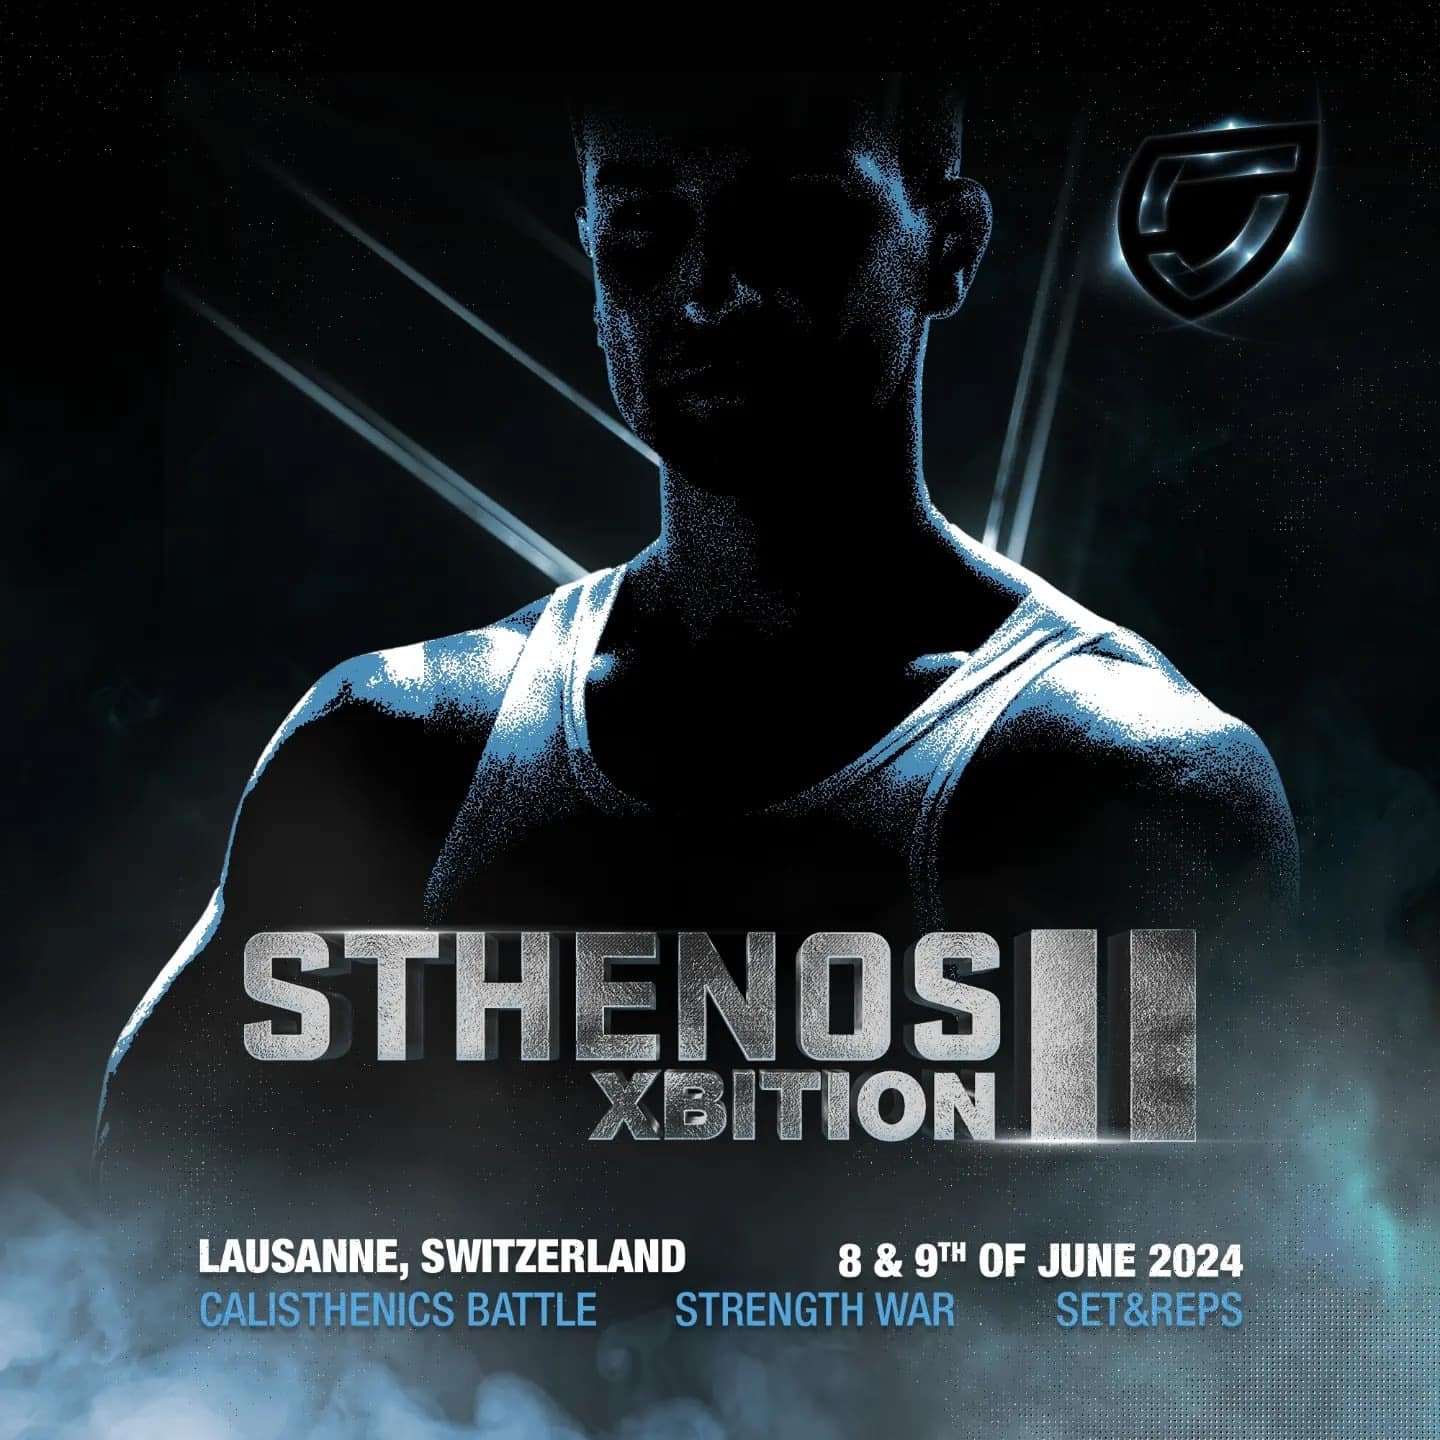 This is the poster for the Sthenos Xbition 2 in Lausanne, Zwitserland. 